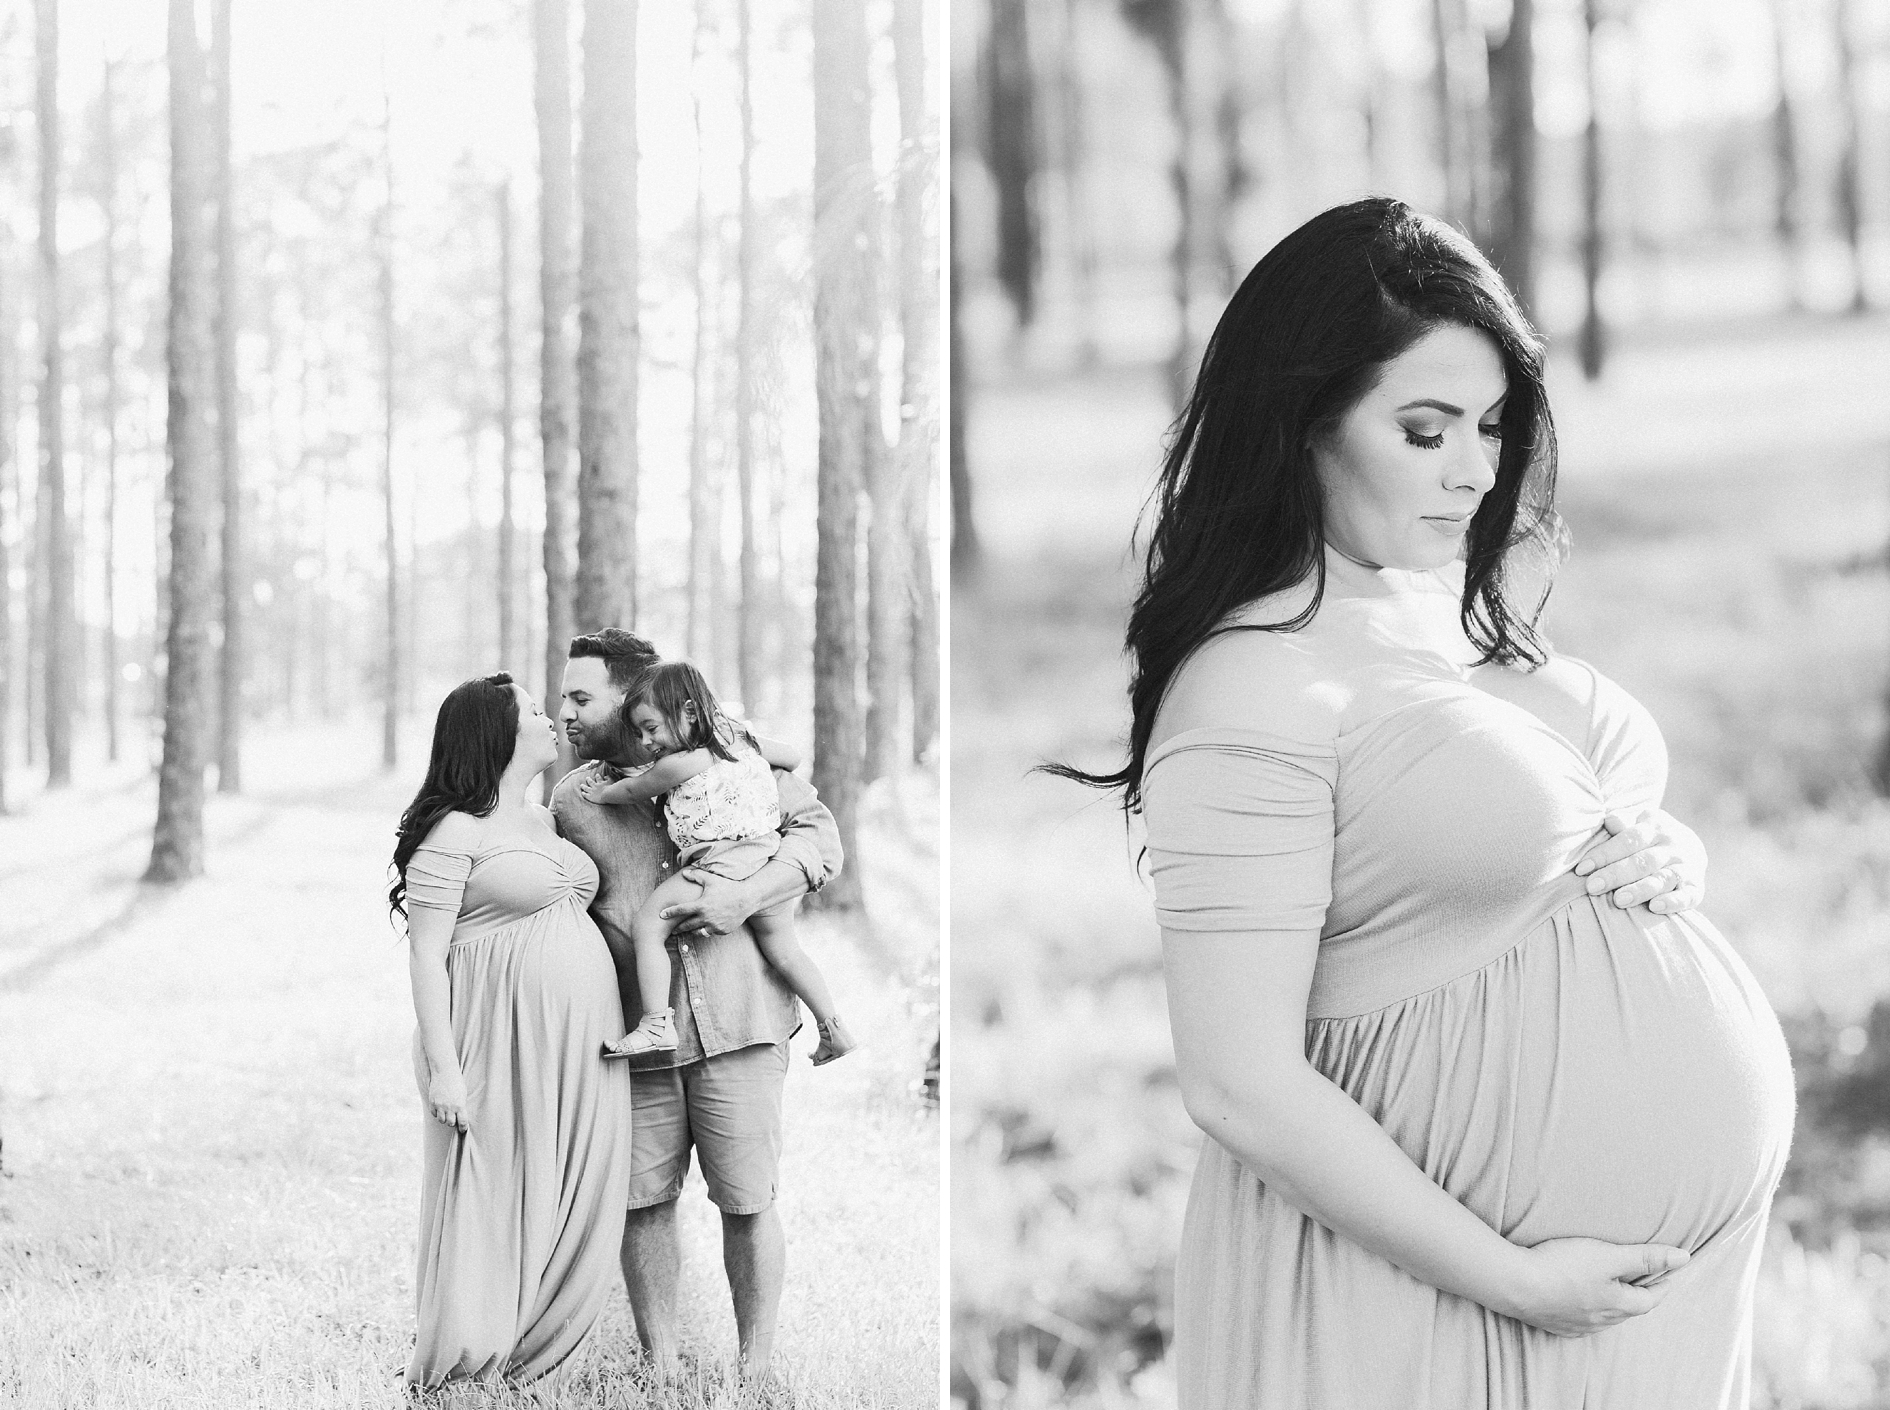 Tampa Maternity Photographer | © Ailyn La Torre Photography 2017